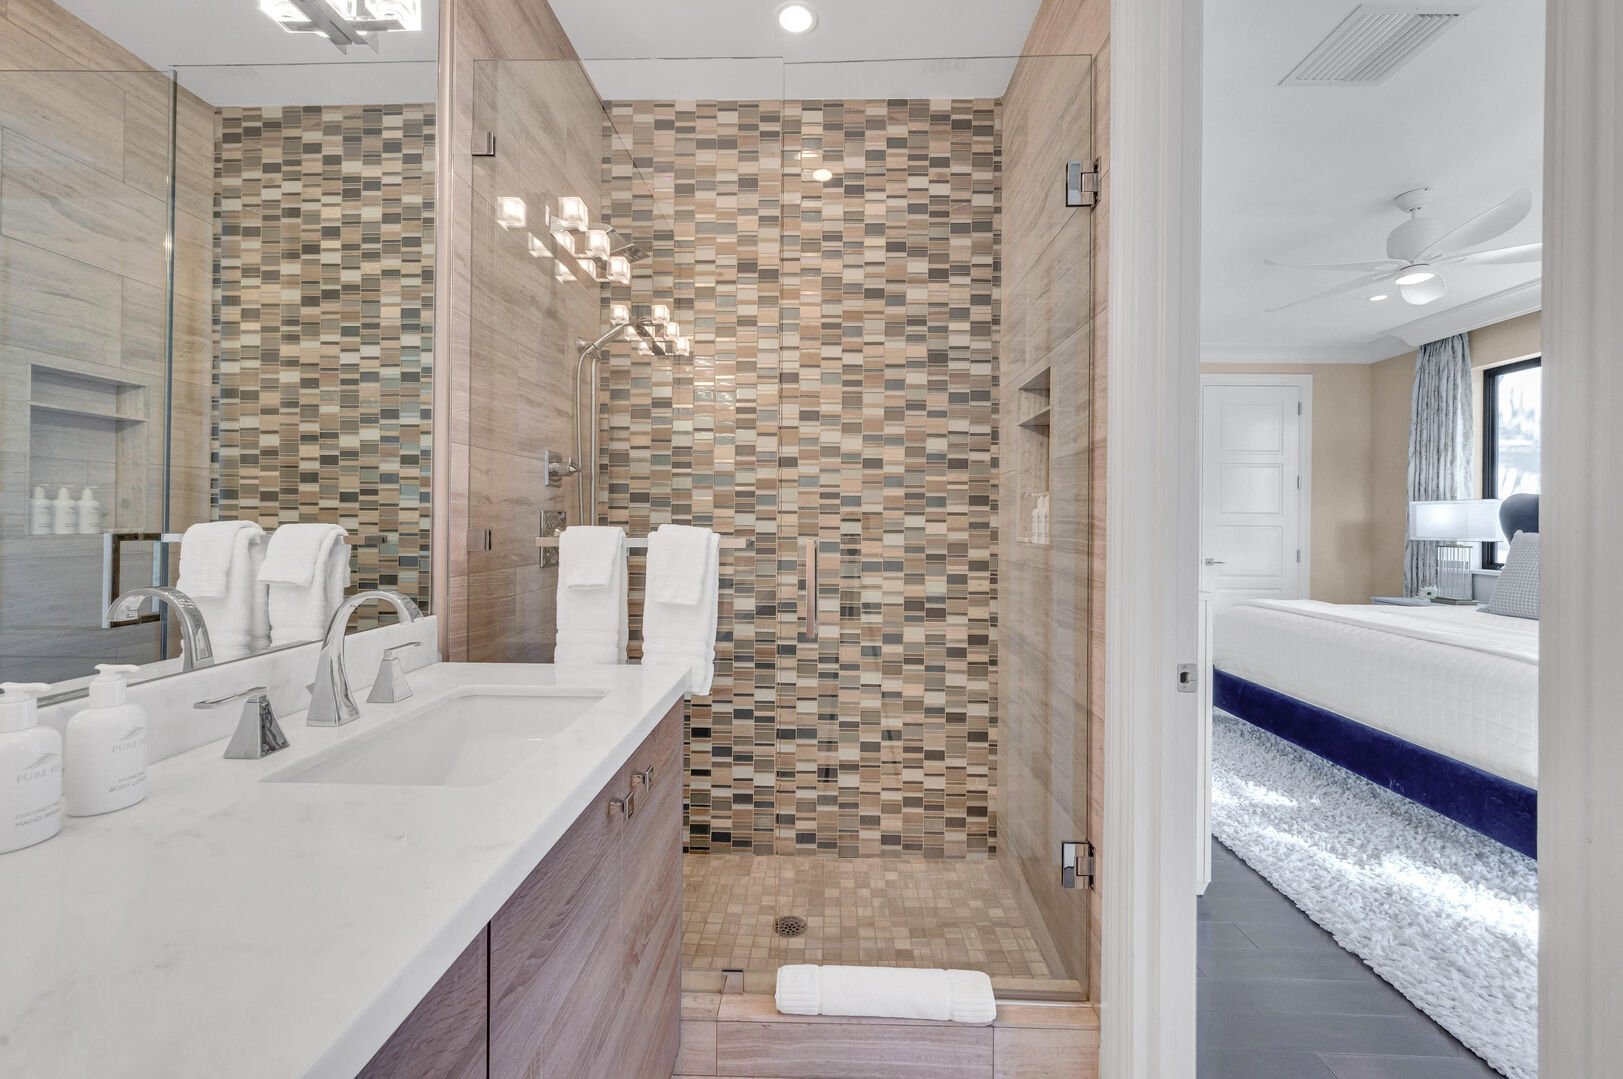 The third bedroom's bathroom features a walk-in shower.